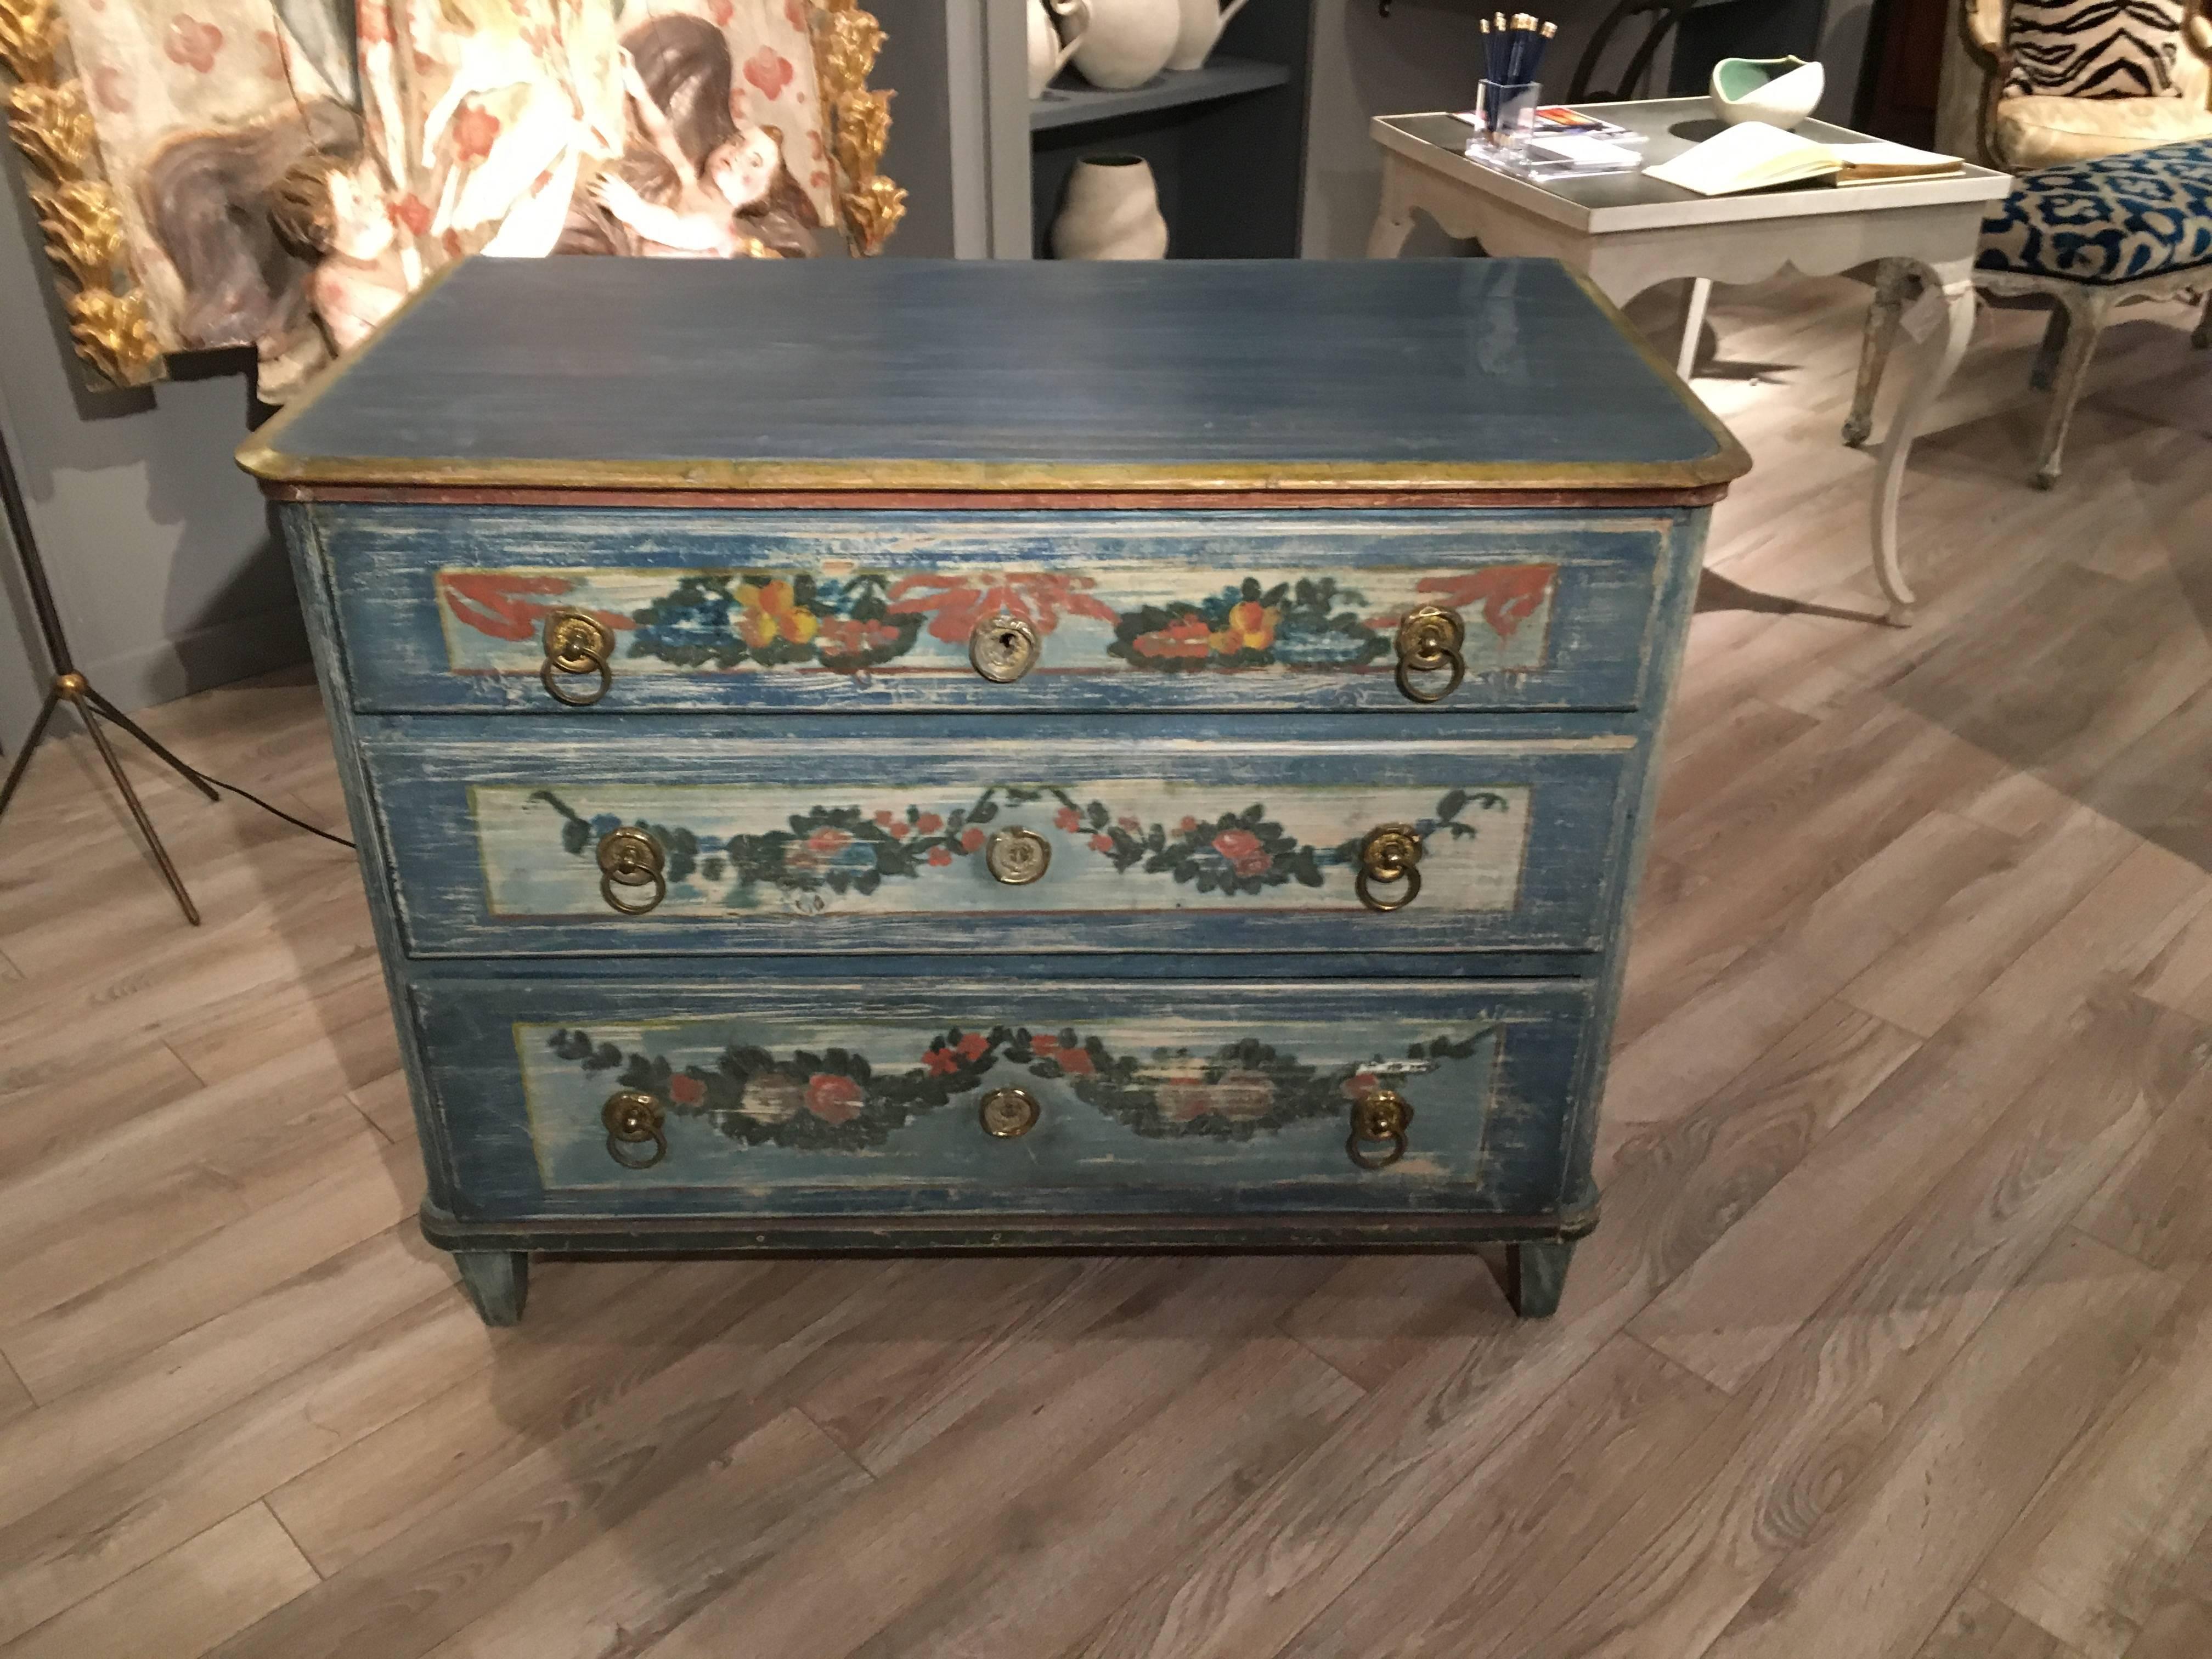 A charming three-drawer commode in pine, German or Austrian, circa 1840, retaining its original blue and cream painted finish, with decorative painted flowers, fruit and garlands, original brass drawer pulls and escutcheons.